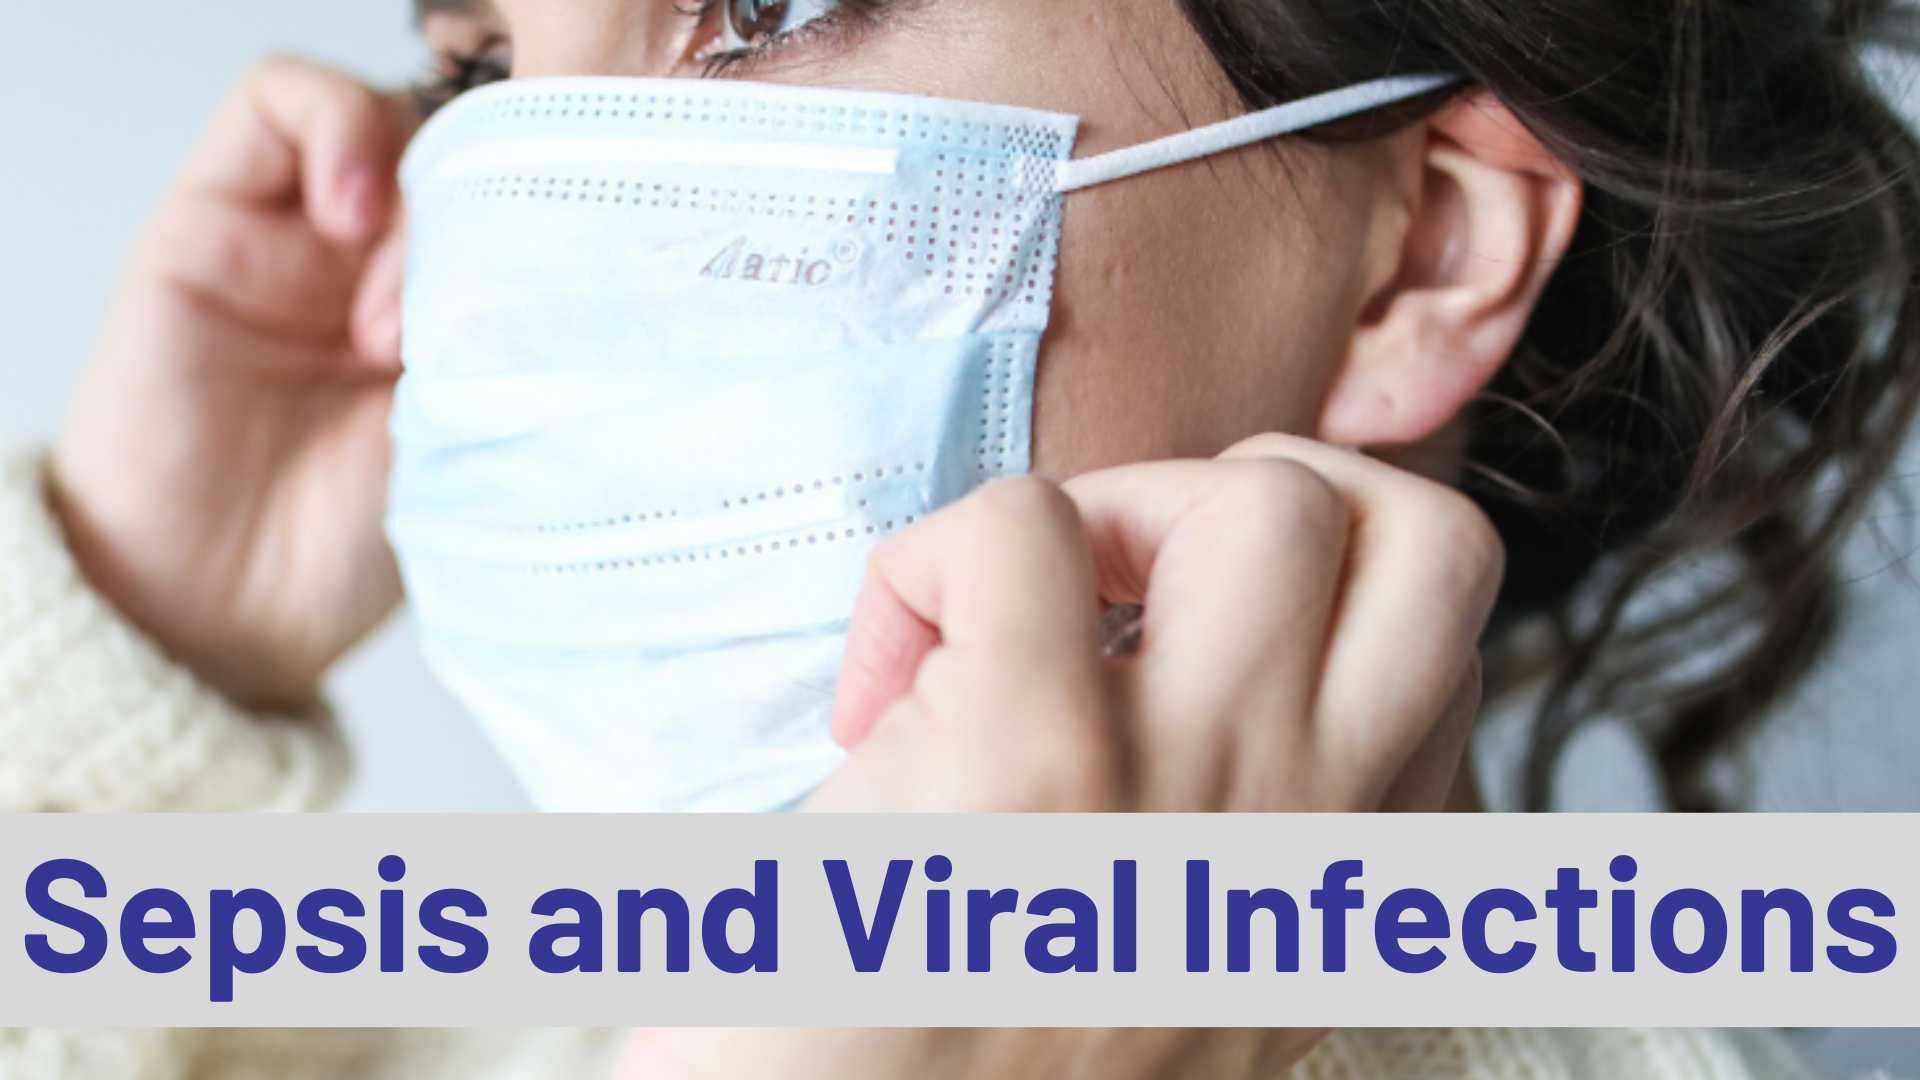 Sepsis and Viral Infections